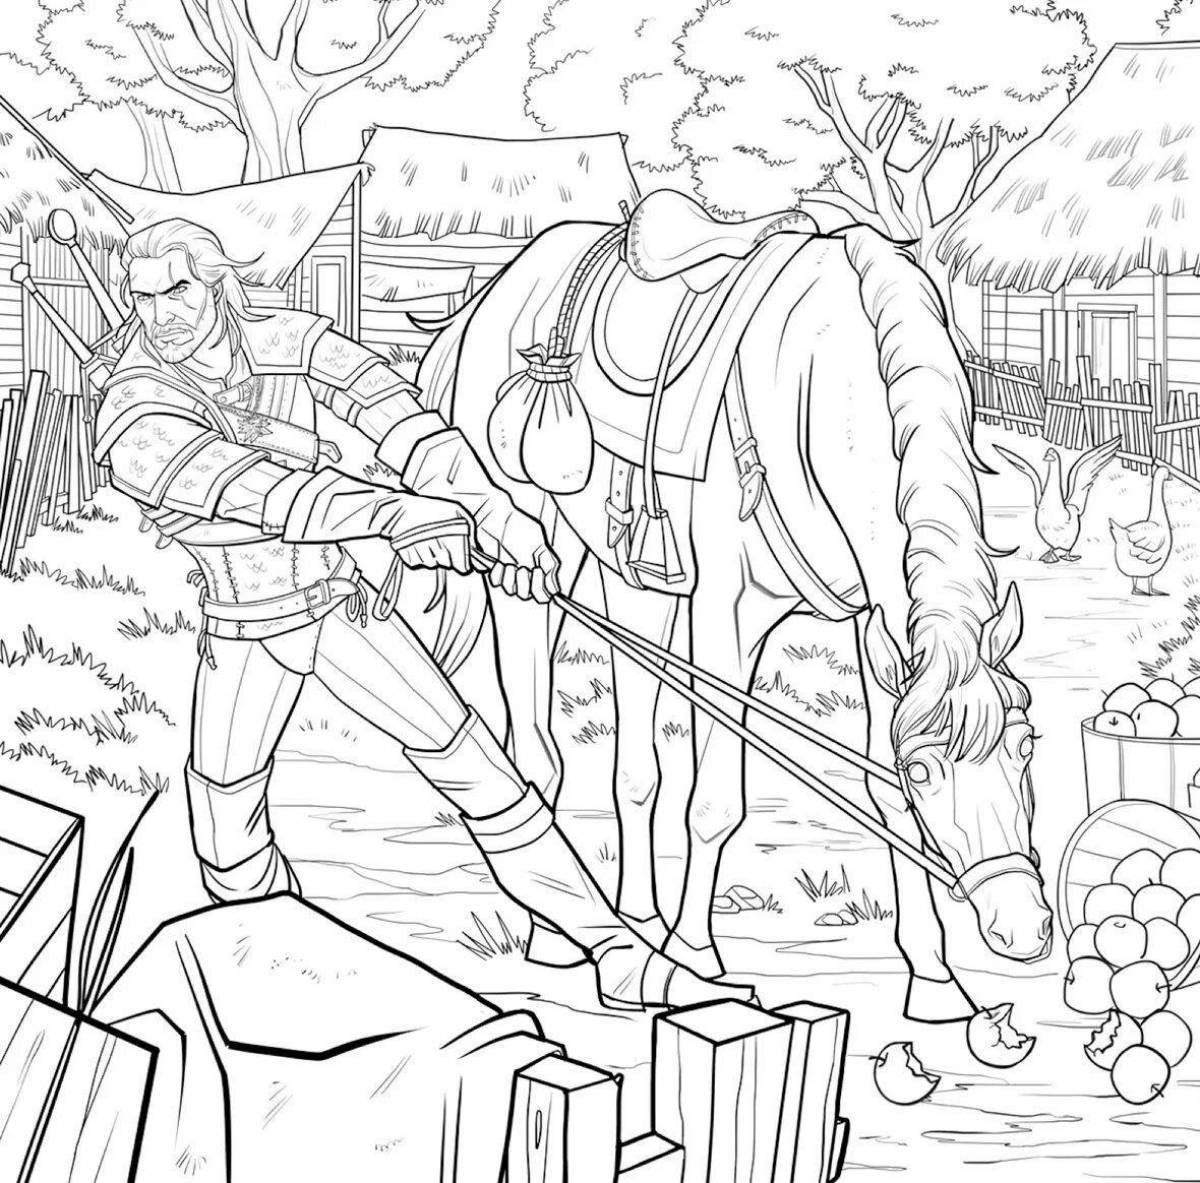 Witcher 3 amazing coloring book